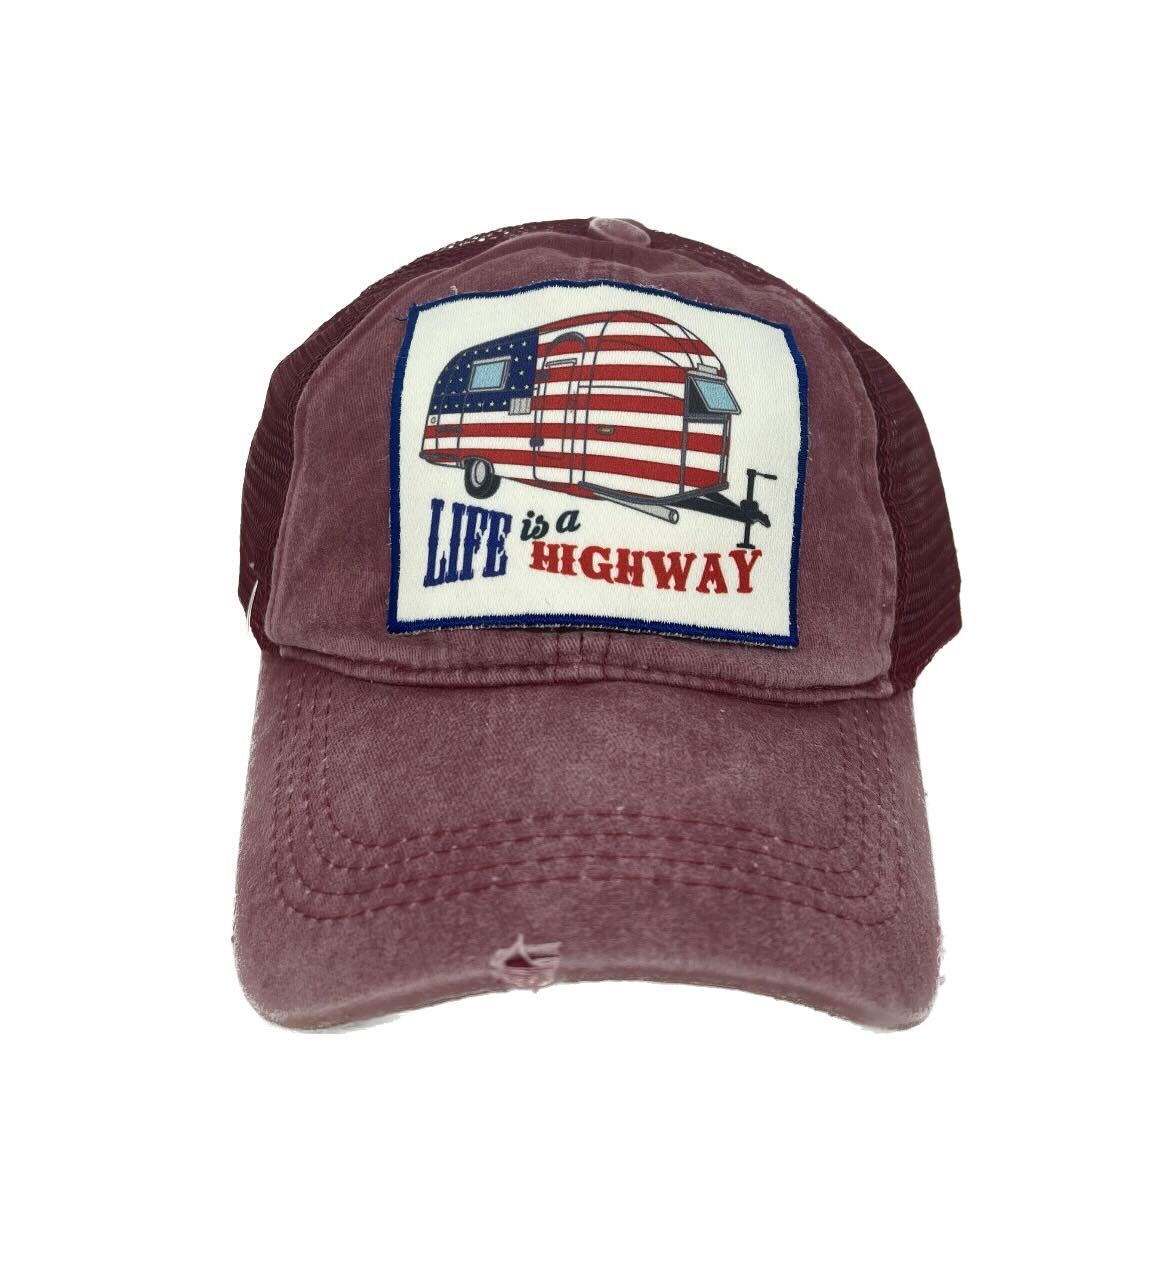 Life Is A Highway Patch on Maroon Hat with Maroon Mesh